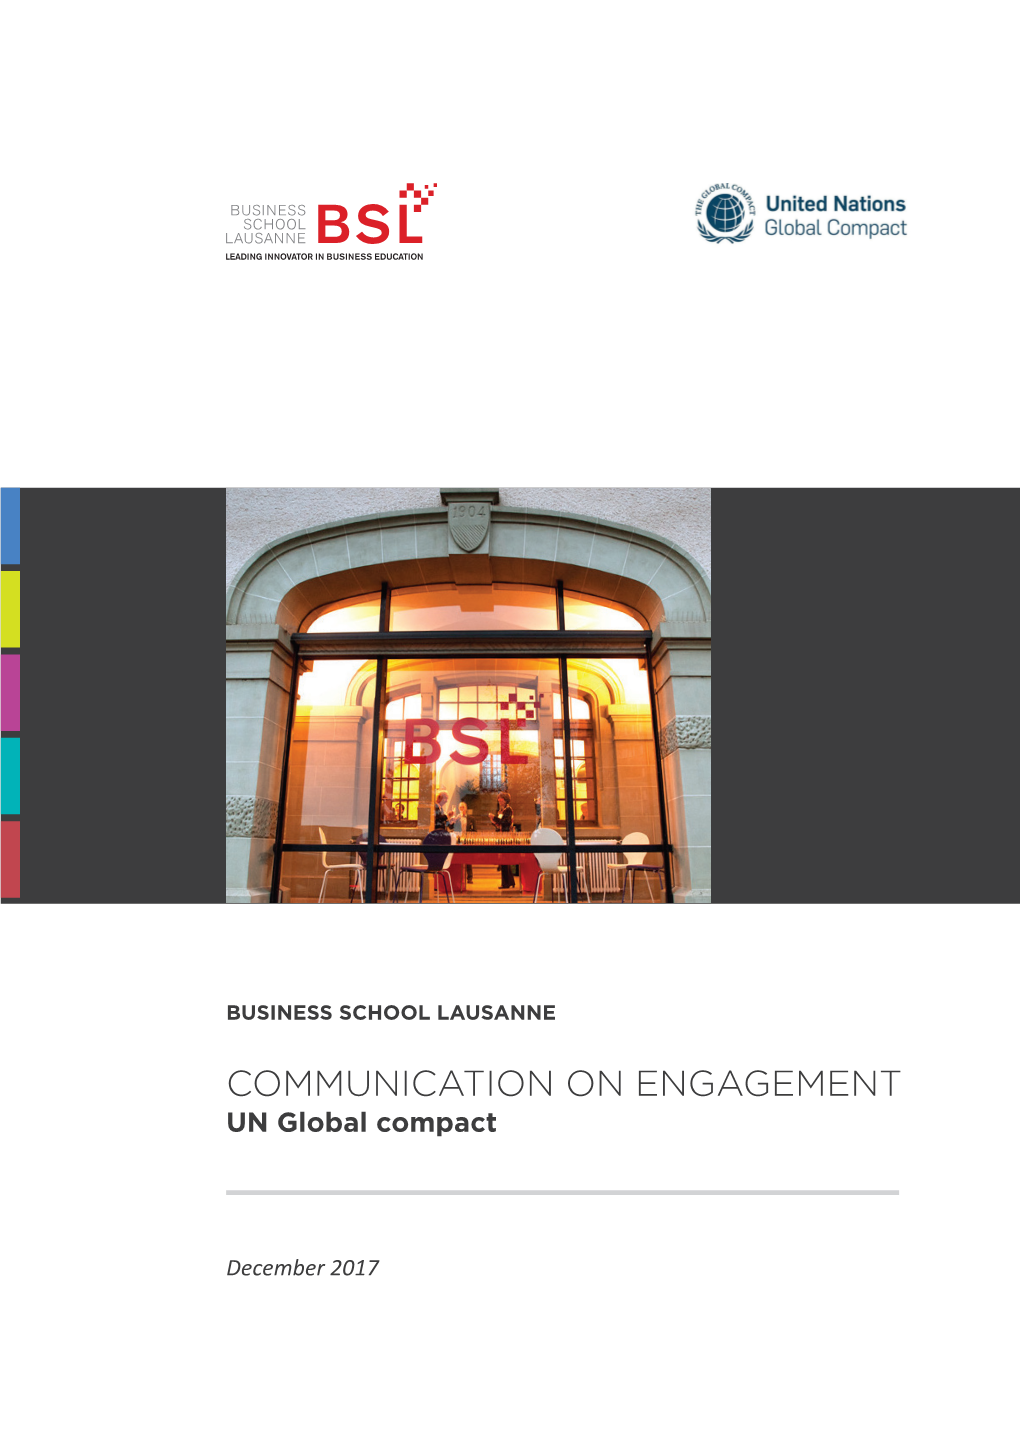 COMMUNICATION on ENGAGEMENT UN Global Compact